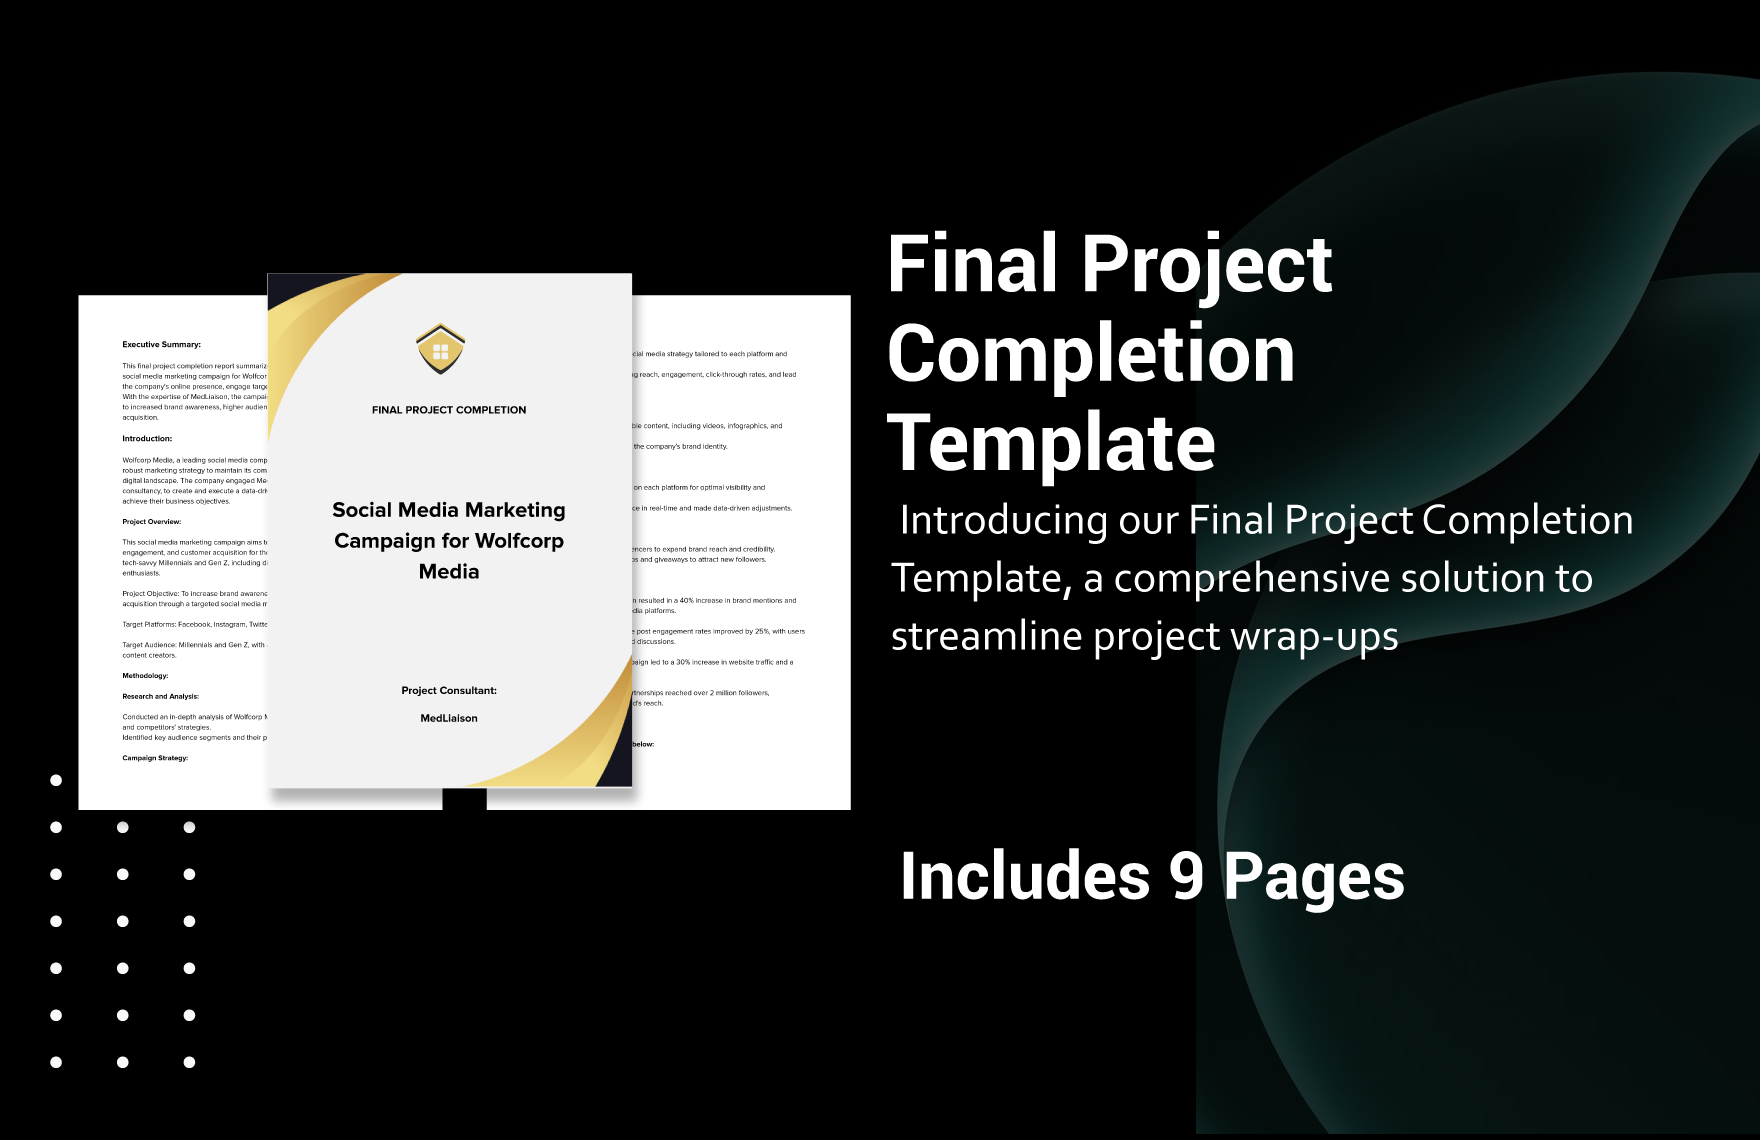 Final Project Completion Template